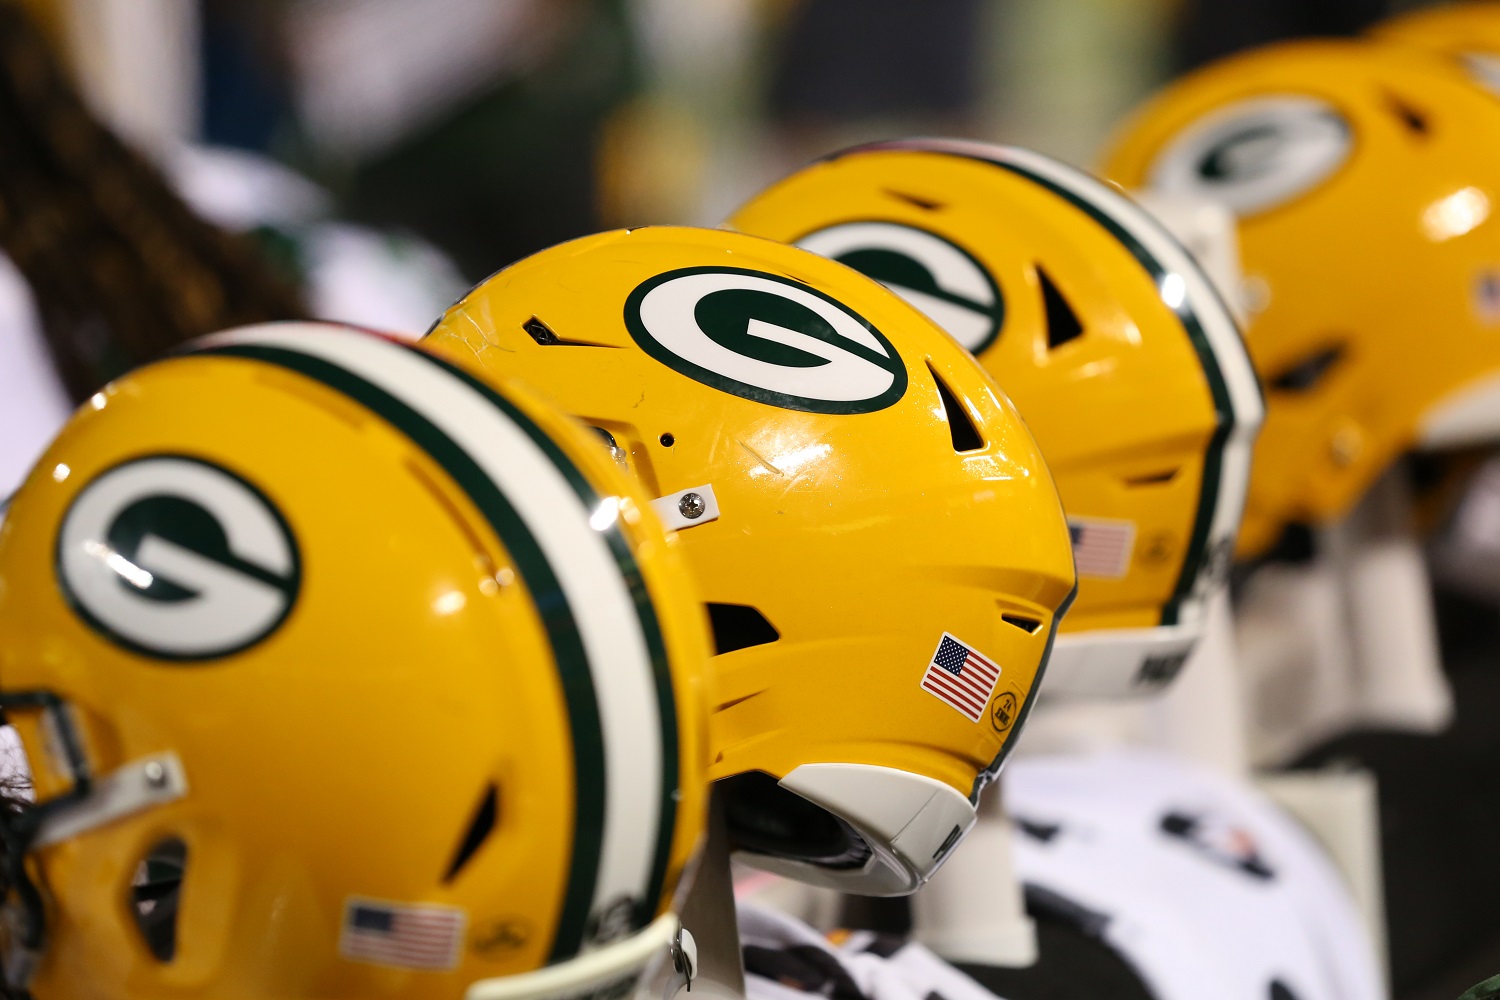 A view of Green Bay Packers helmets during an NFL game against the Kansas City Chiefs on Oct. 27, 2019.